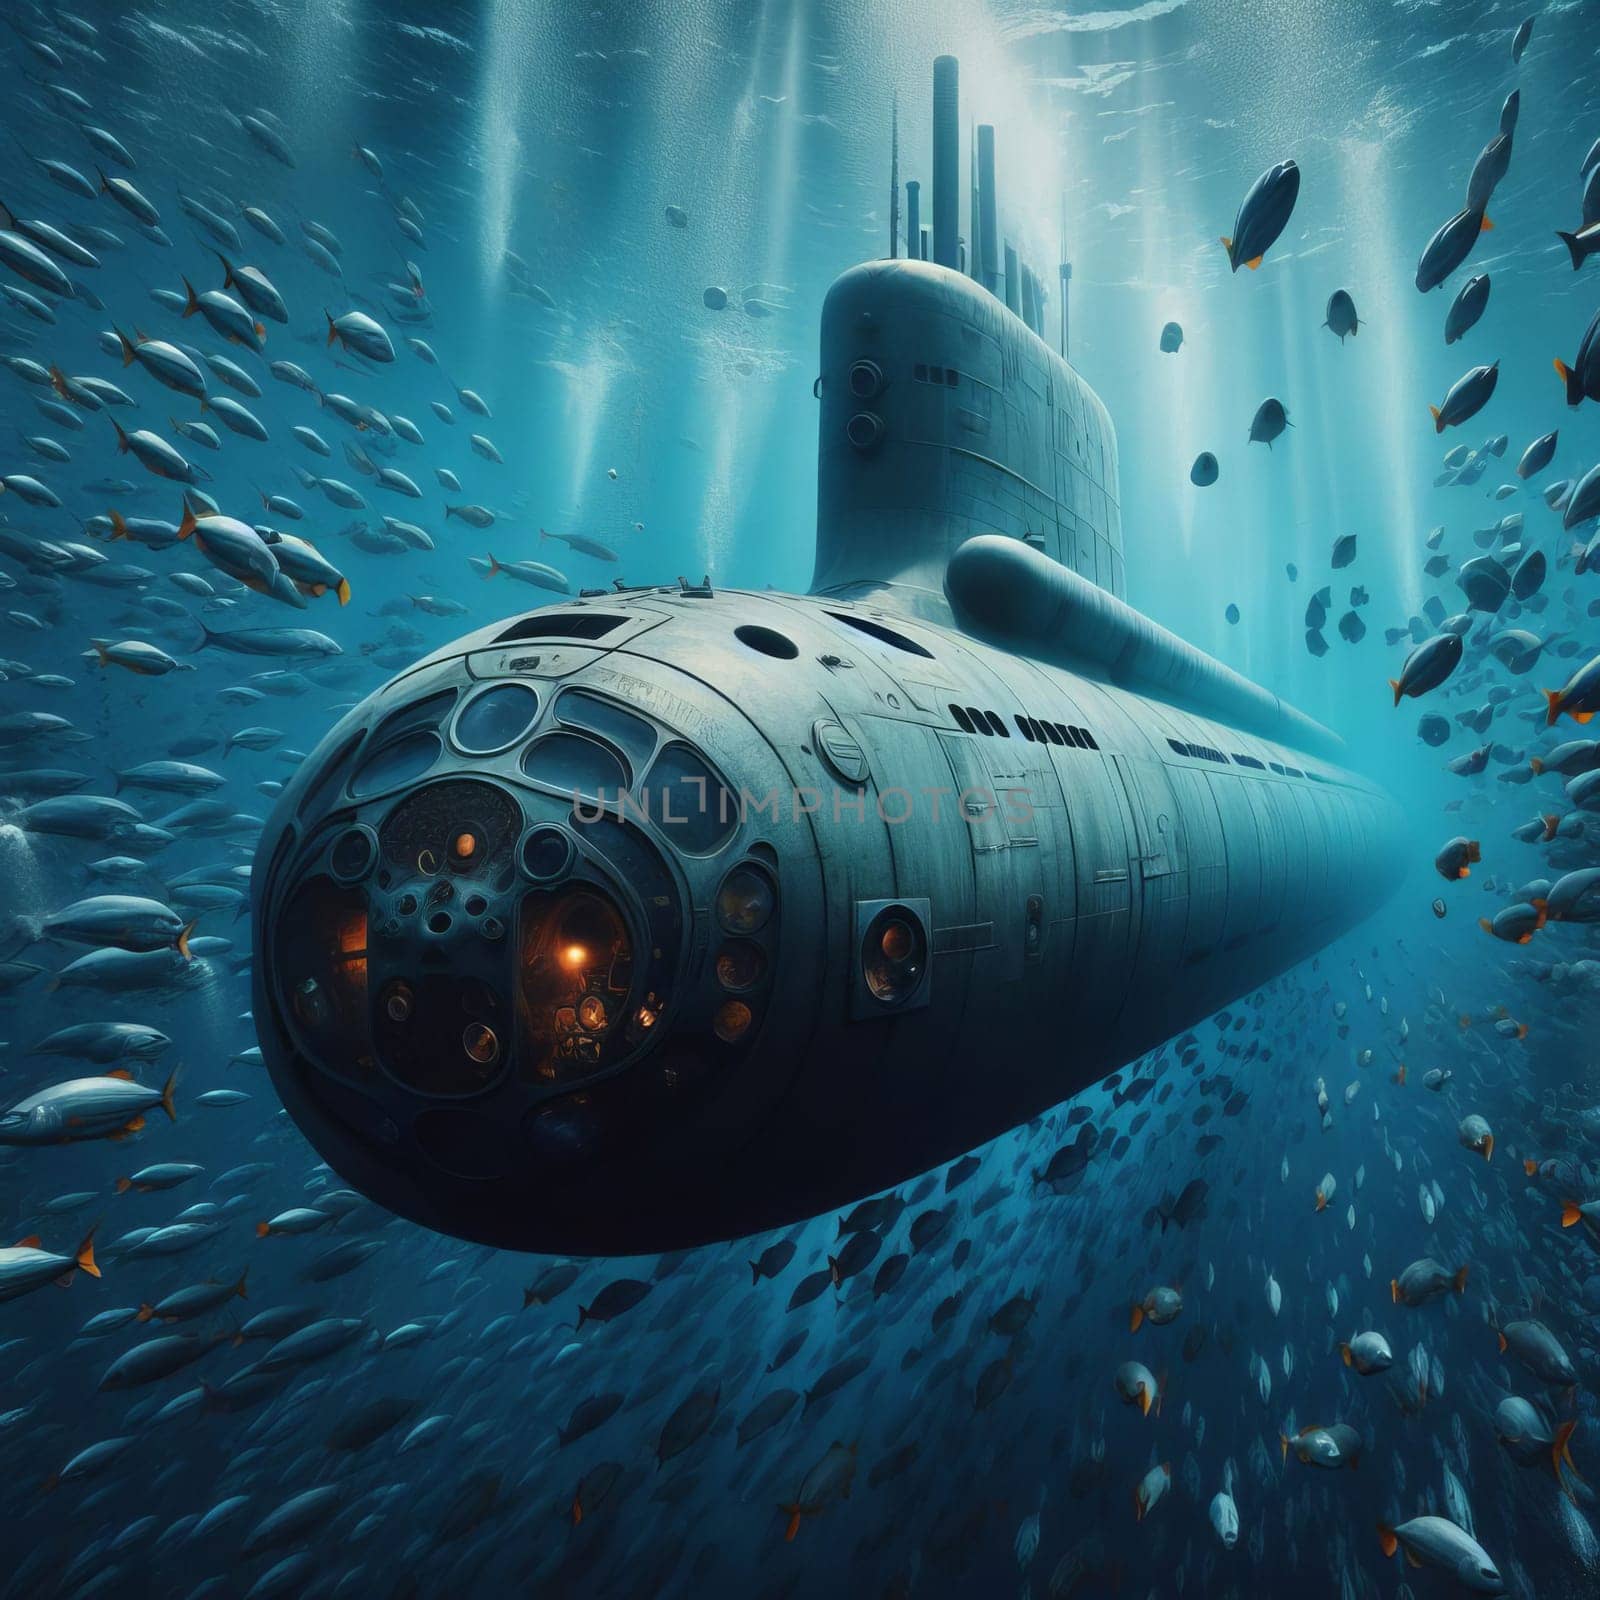 A atomic submarine navigates the deep ocean, surrounded by a vibrant school of fish, highlighting marine exploration